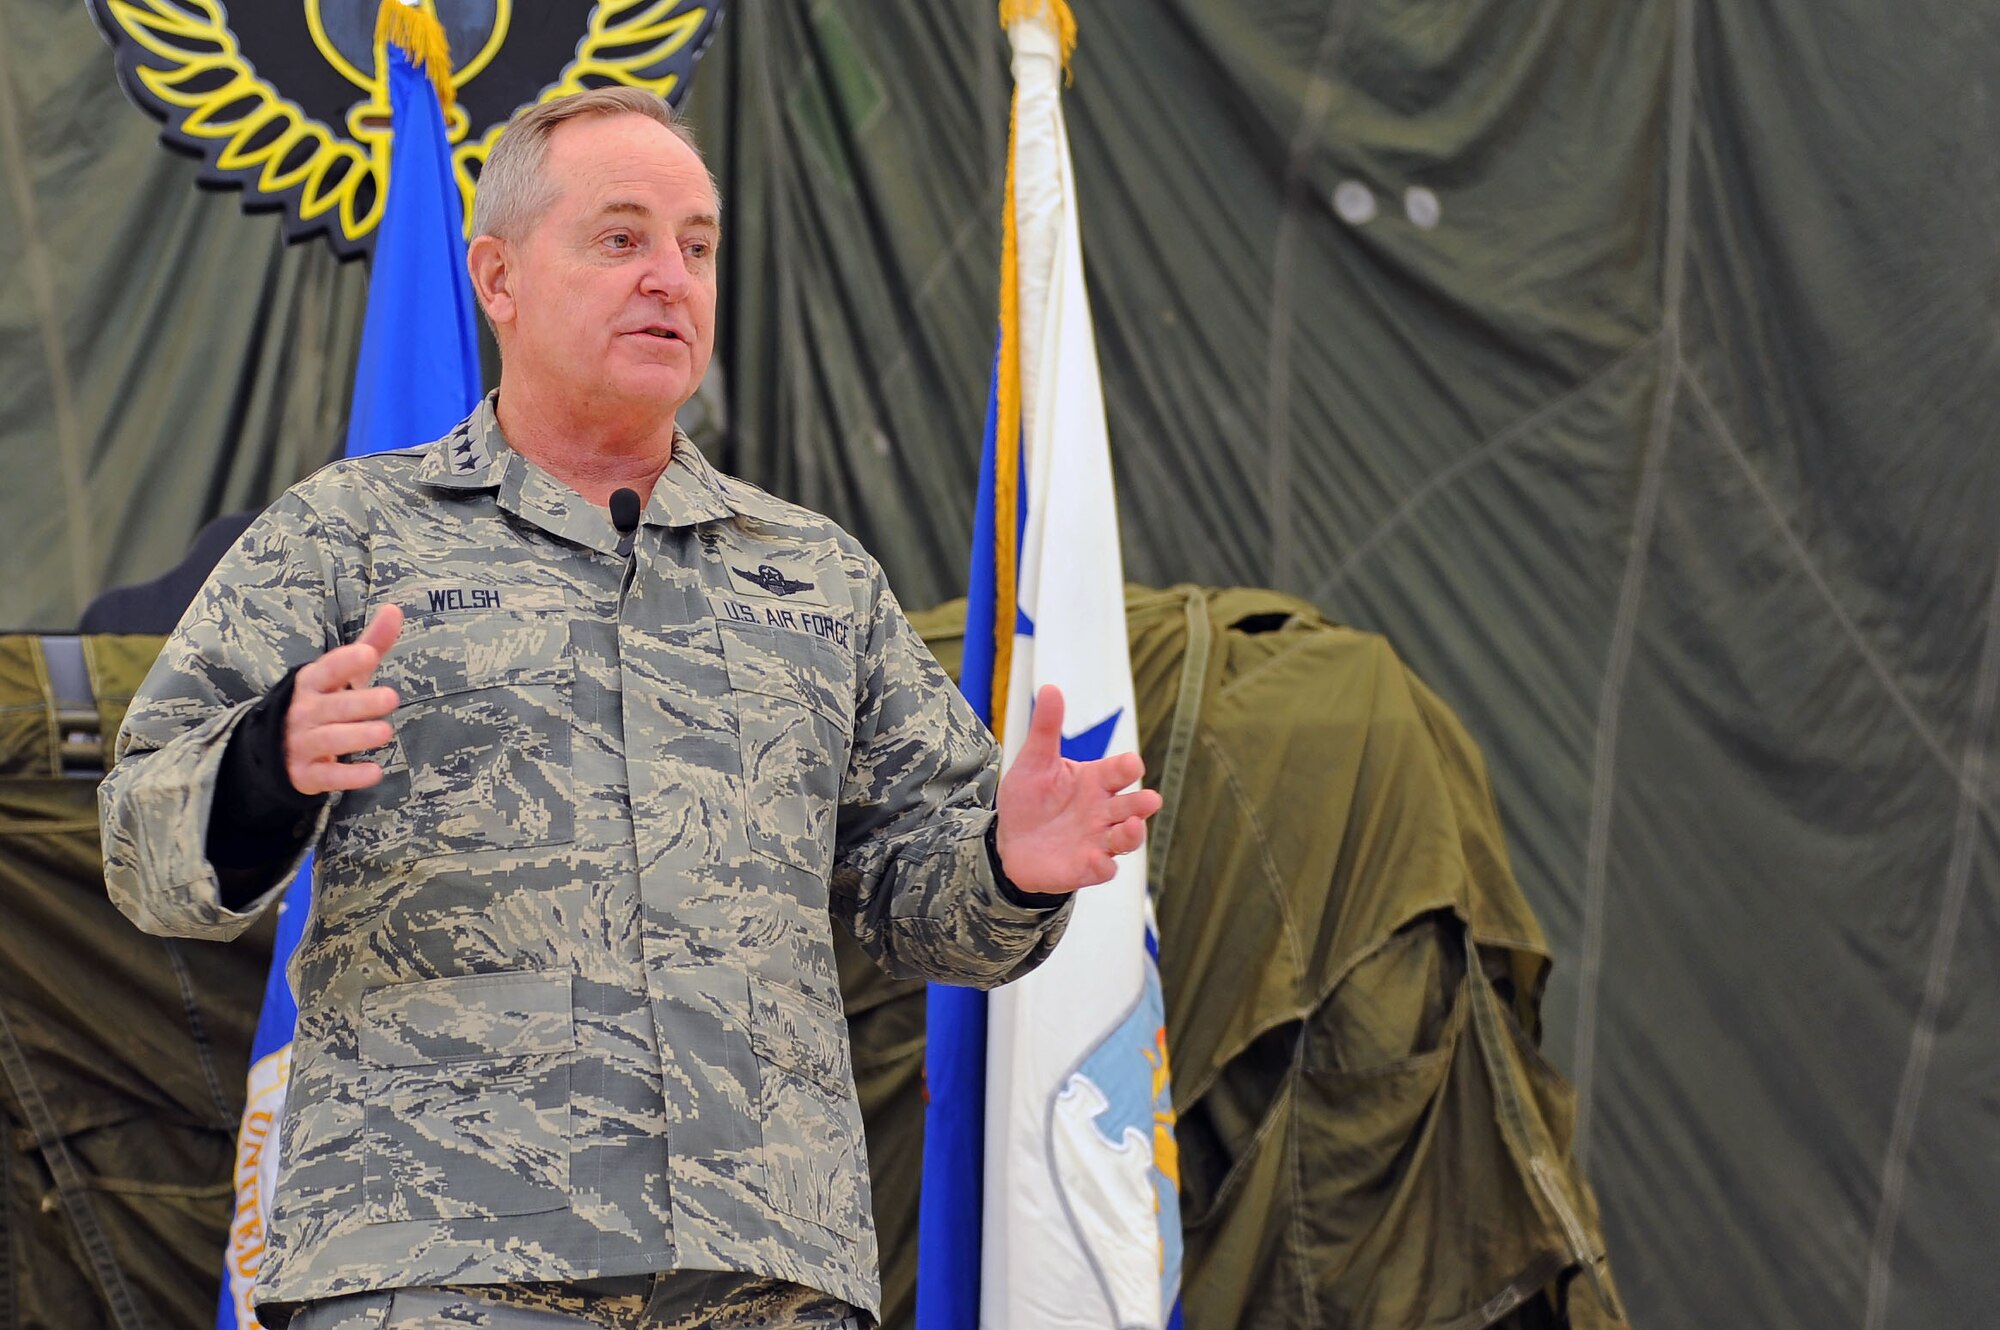 Air Force Chief of Staff Gen. Mark A. Welsh III addresses air commandos and local leadership during an all call Nov. 17, 2015, at Cannon Air Force Base, N.M. Welsh spoke about the value of communication, common sense and caring for one another, and fielded questions pertaining to foreign policy and the future of the remotely piloted aircraft community. (U.S. Air Force photo/Staff Sgt. Whitney Amstutz)